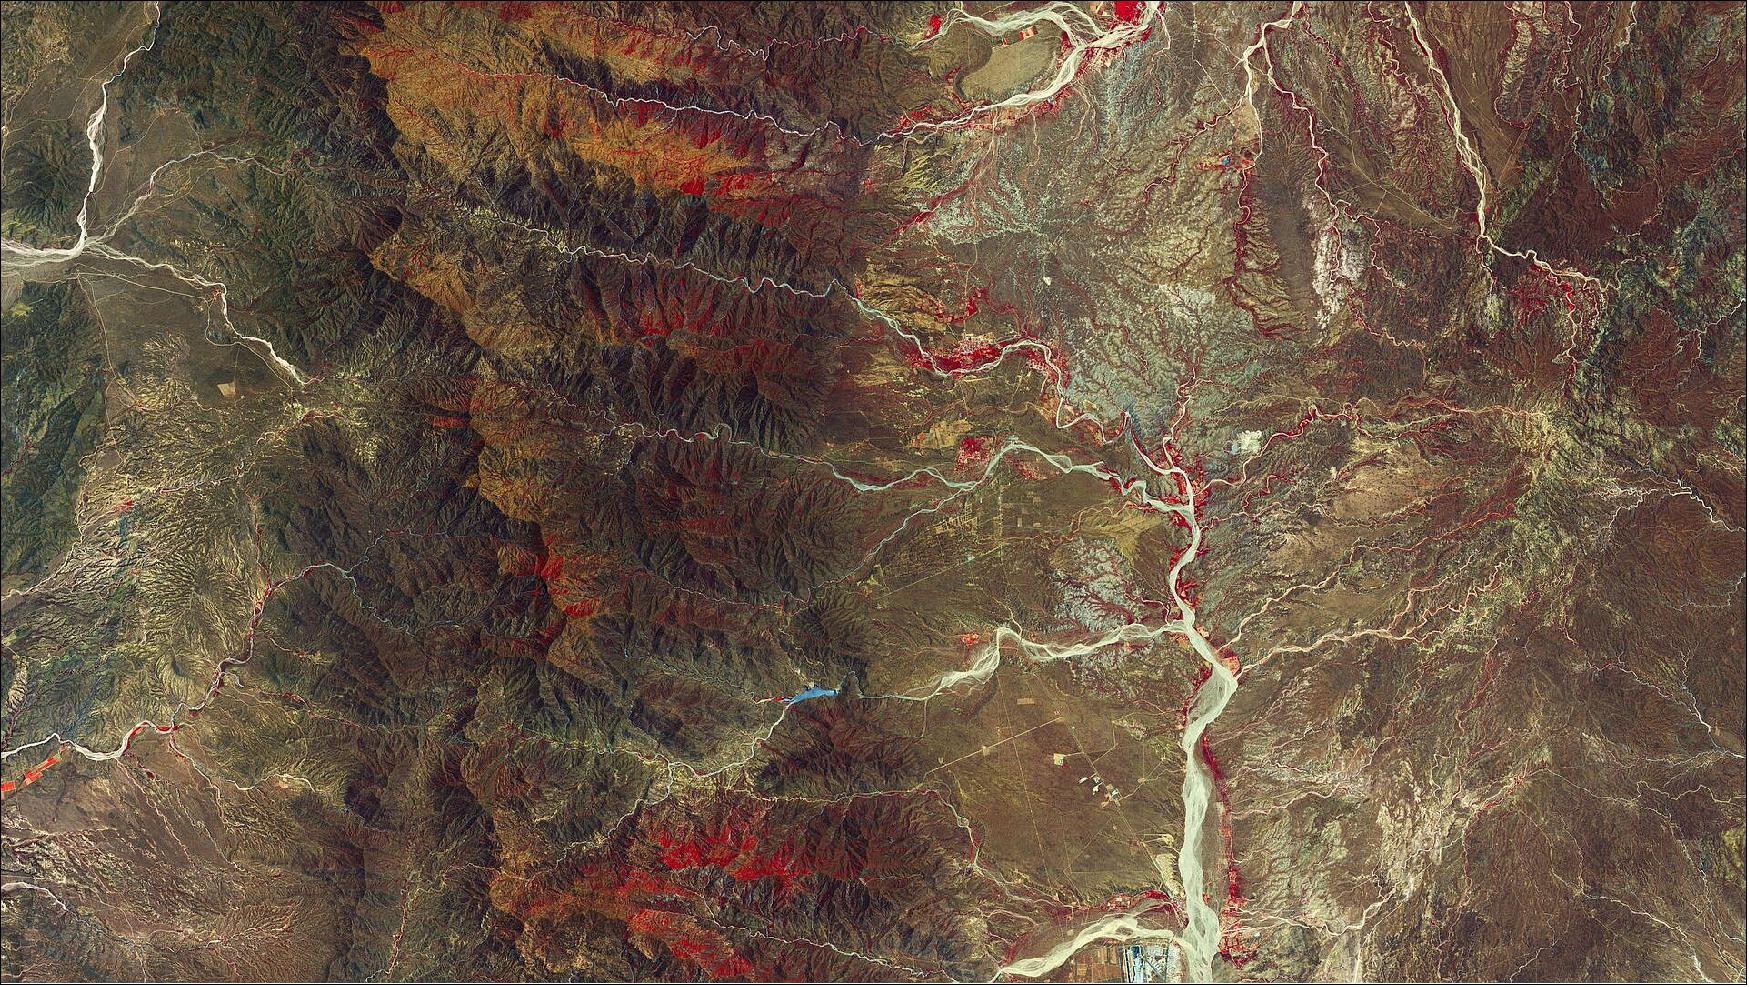 Figure 43: This image was acquired on 20 June 2020, the region is particularly dry with little vegetation visible (image credit: ESA, the image contains modified Copernicus Sentinel data (2020), processed by ESA, CC BY-SA 3.0 IGO)